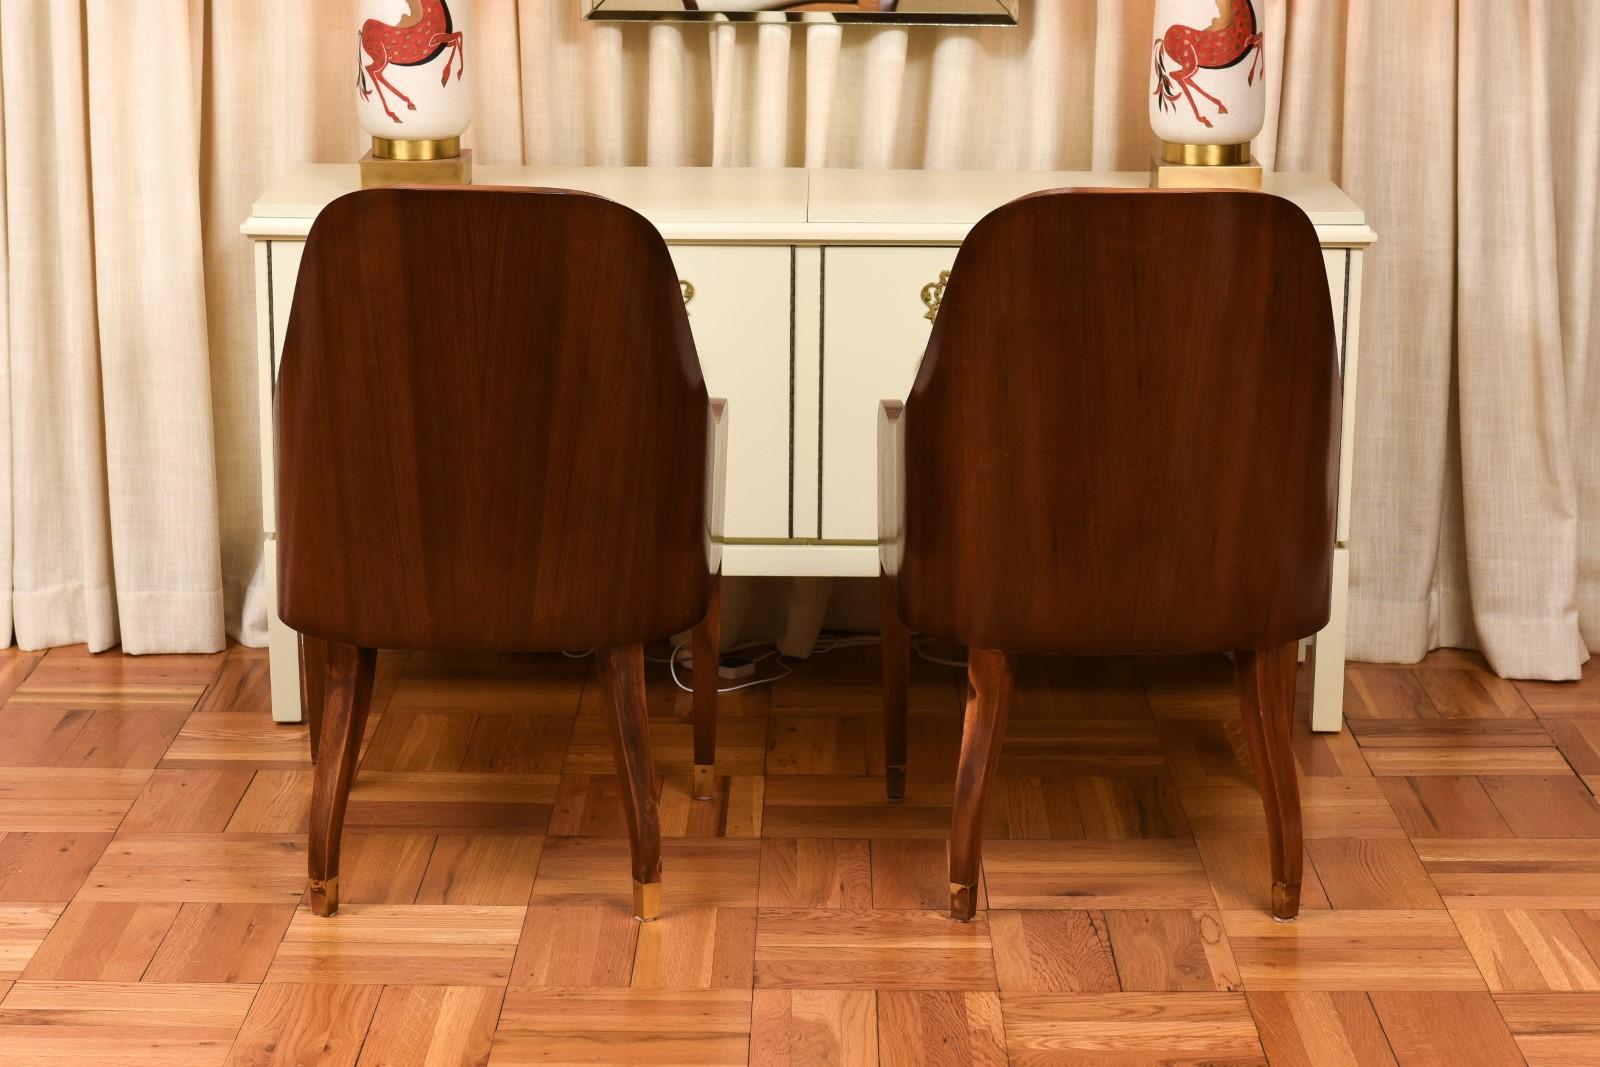 Spectacular Set of 10 Art Deco Revival Chairs in Bookmatch Figured Walnut For Sale 5